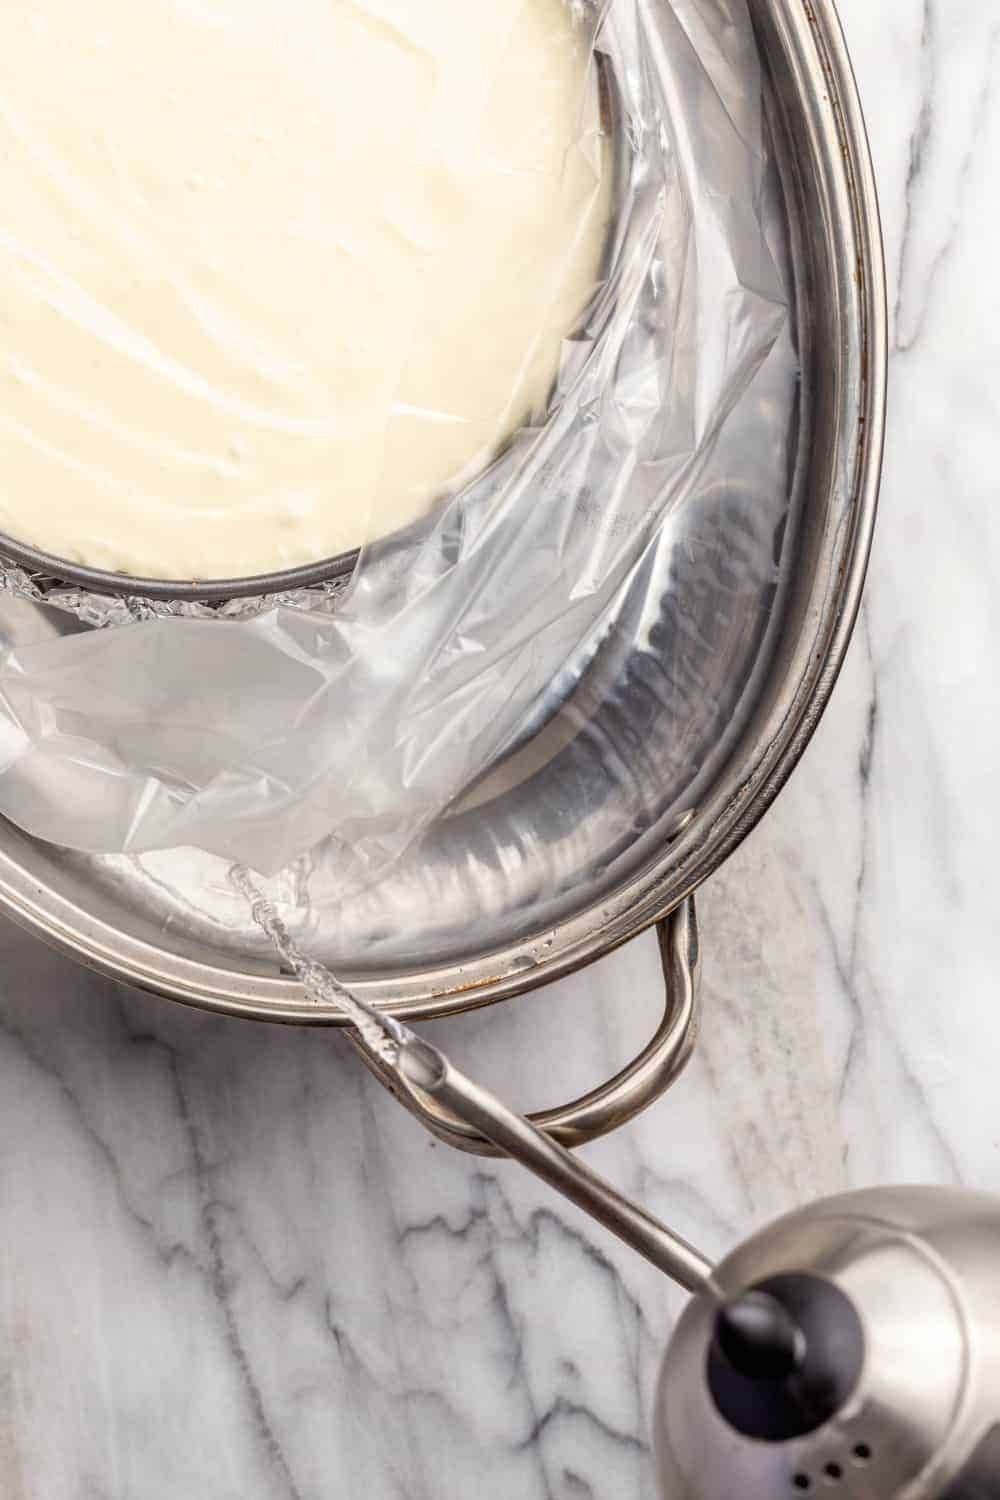 How to Make a Cheesecake Water Bath (Video) - Sally's Baking Addiction